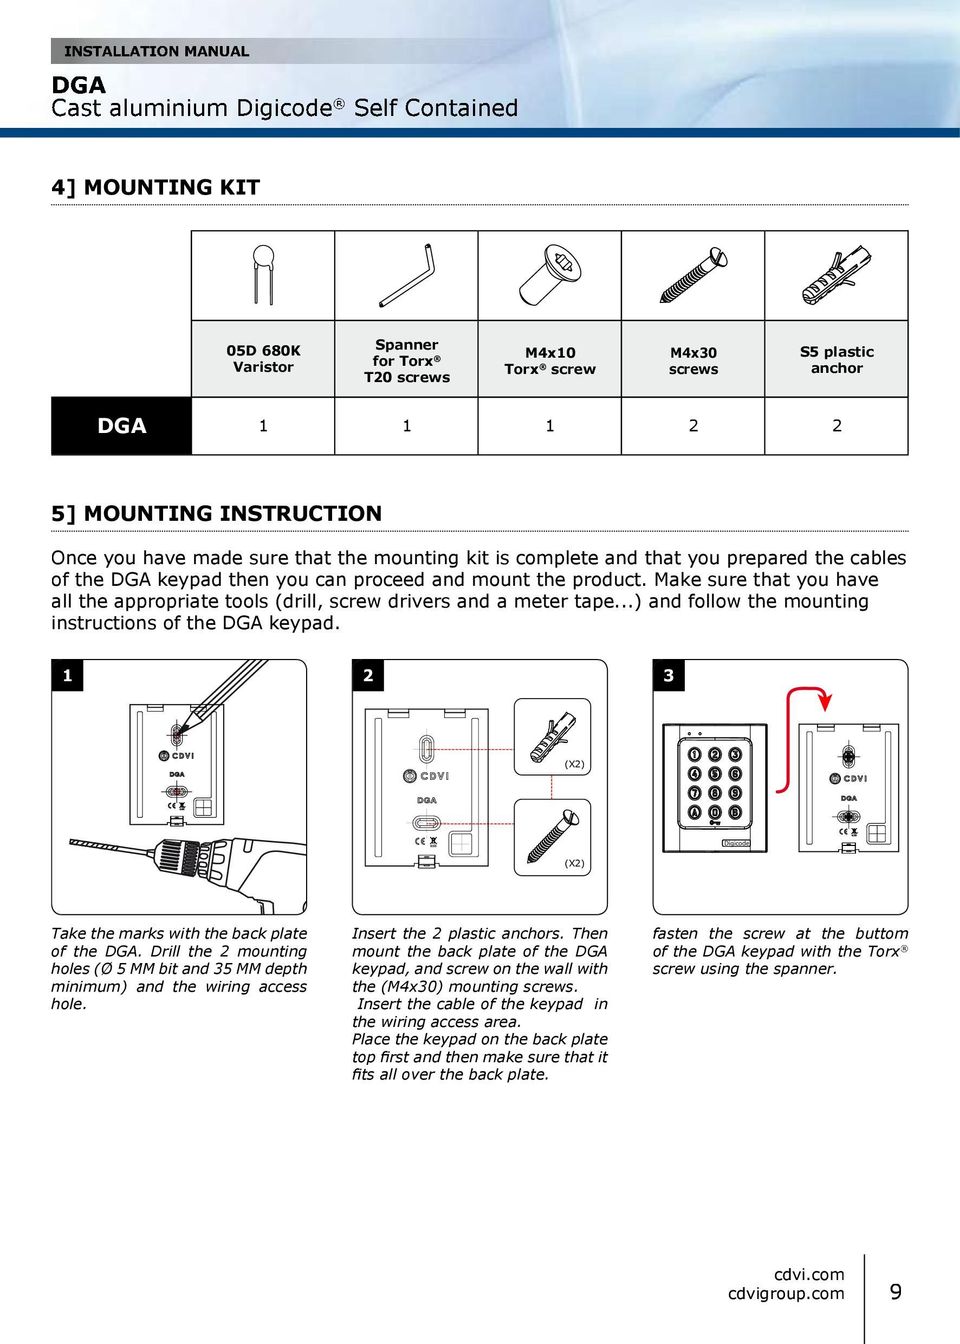 Make sure that you have all the appropriate tools (drill, screw drivers and a meter tape...) and follow the mounting instructions of the keypad.